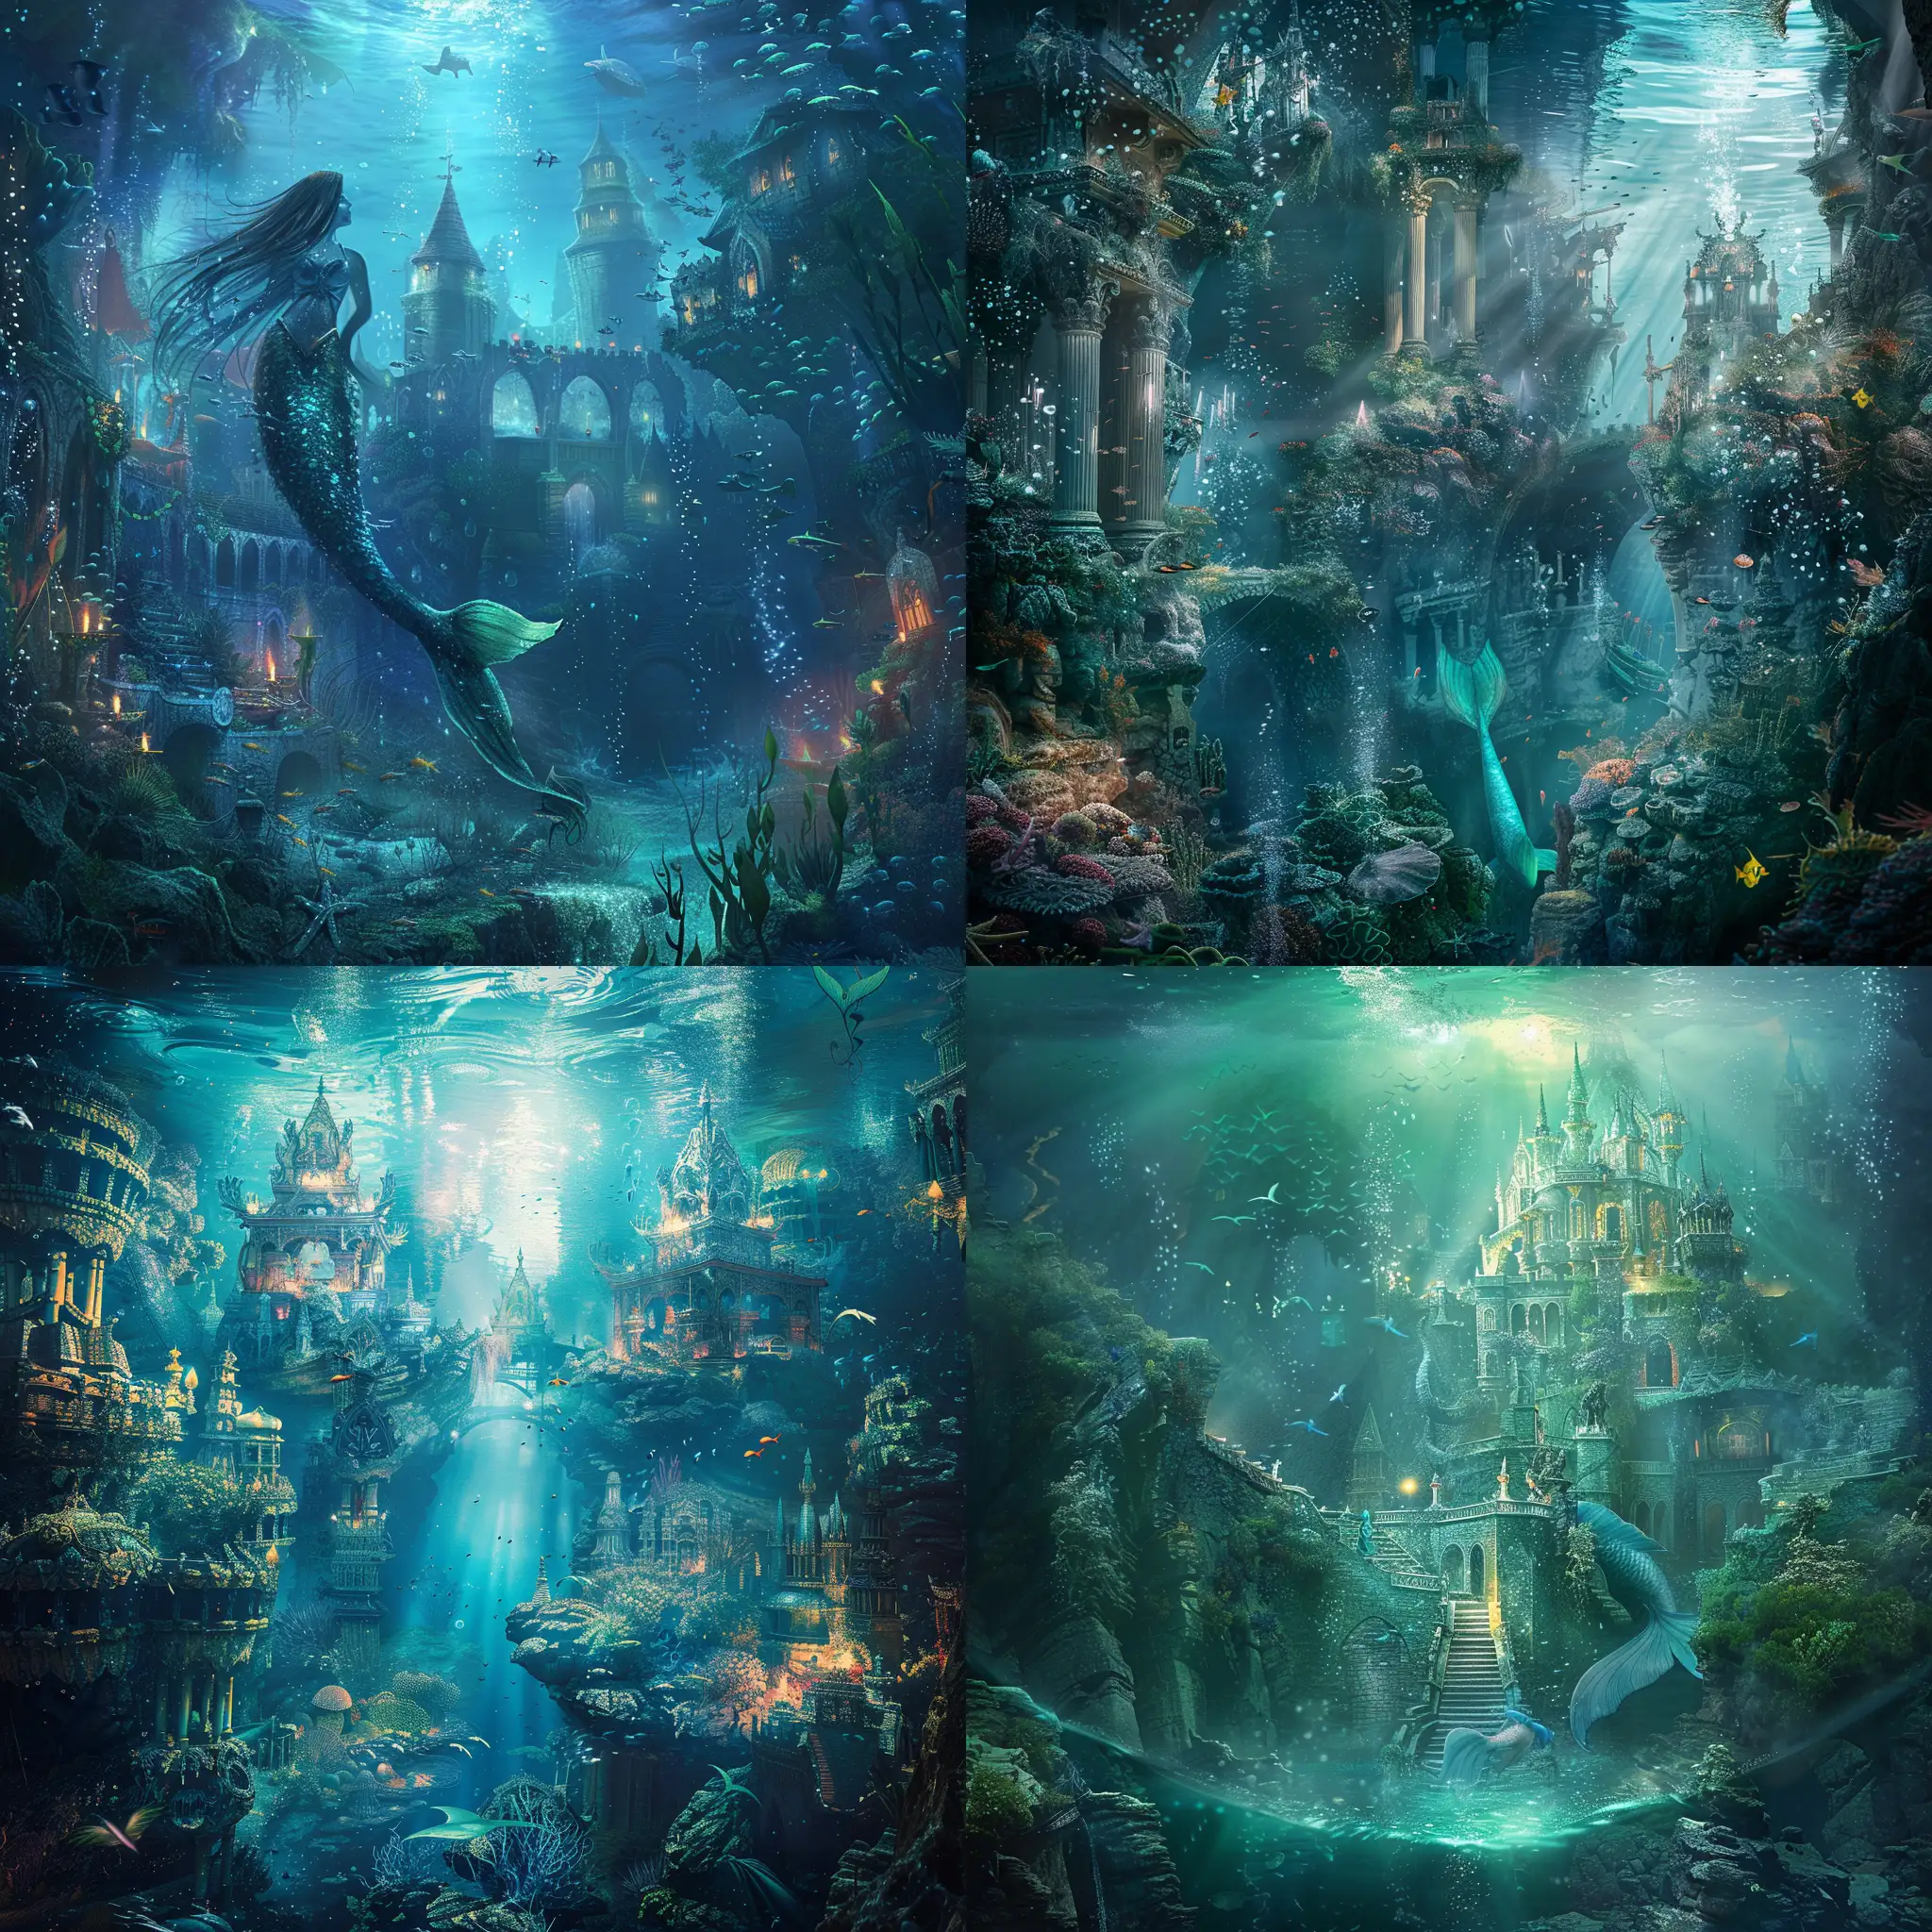 An underwater image of a mermaid kingdom. Magical fantasy mysterious etheral highly detailed.